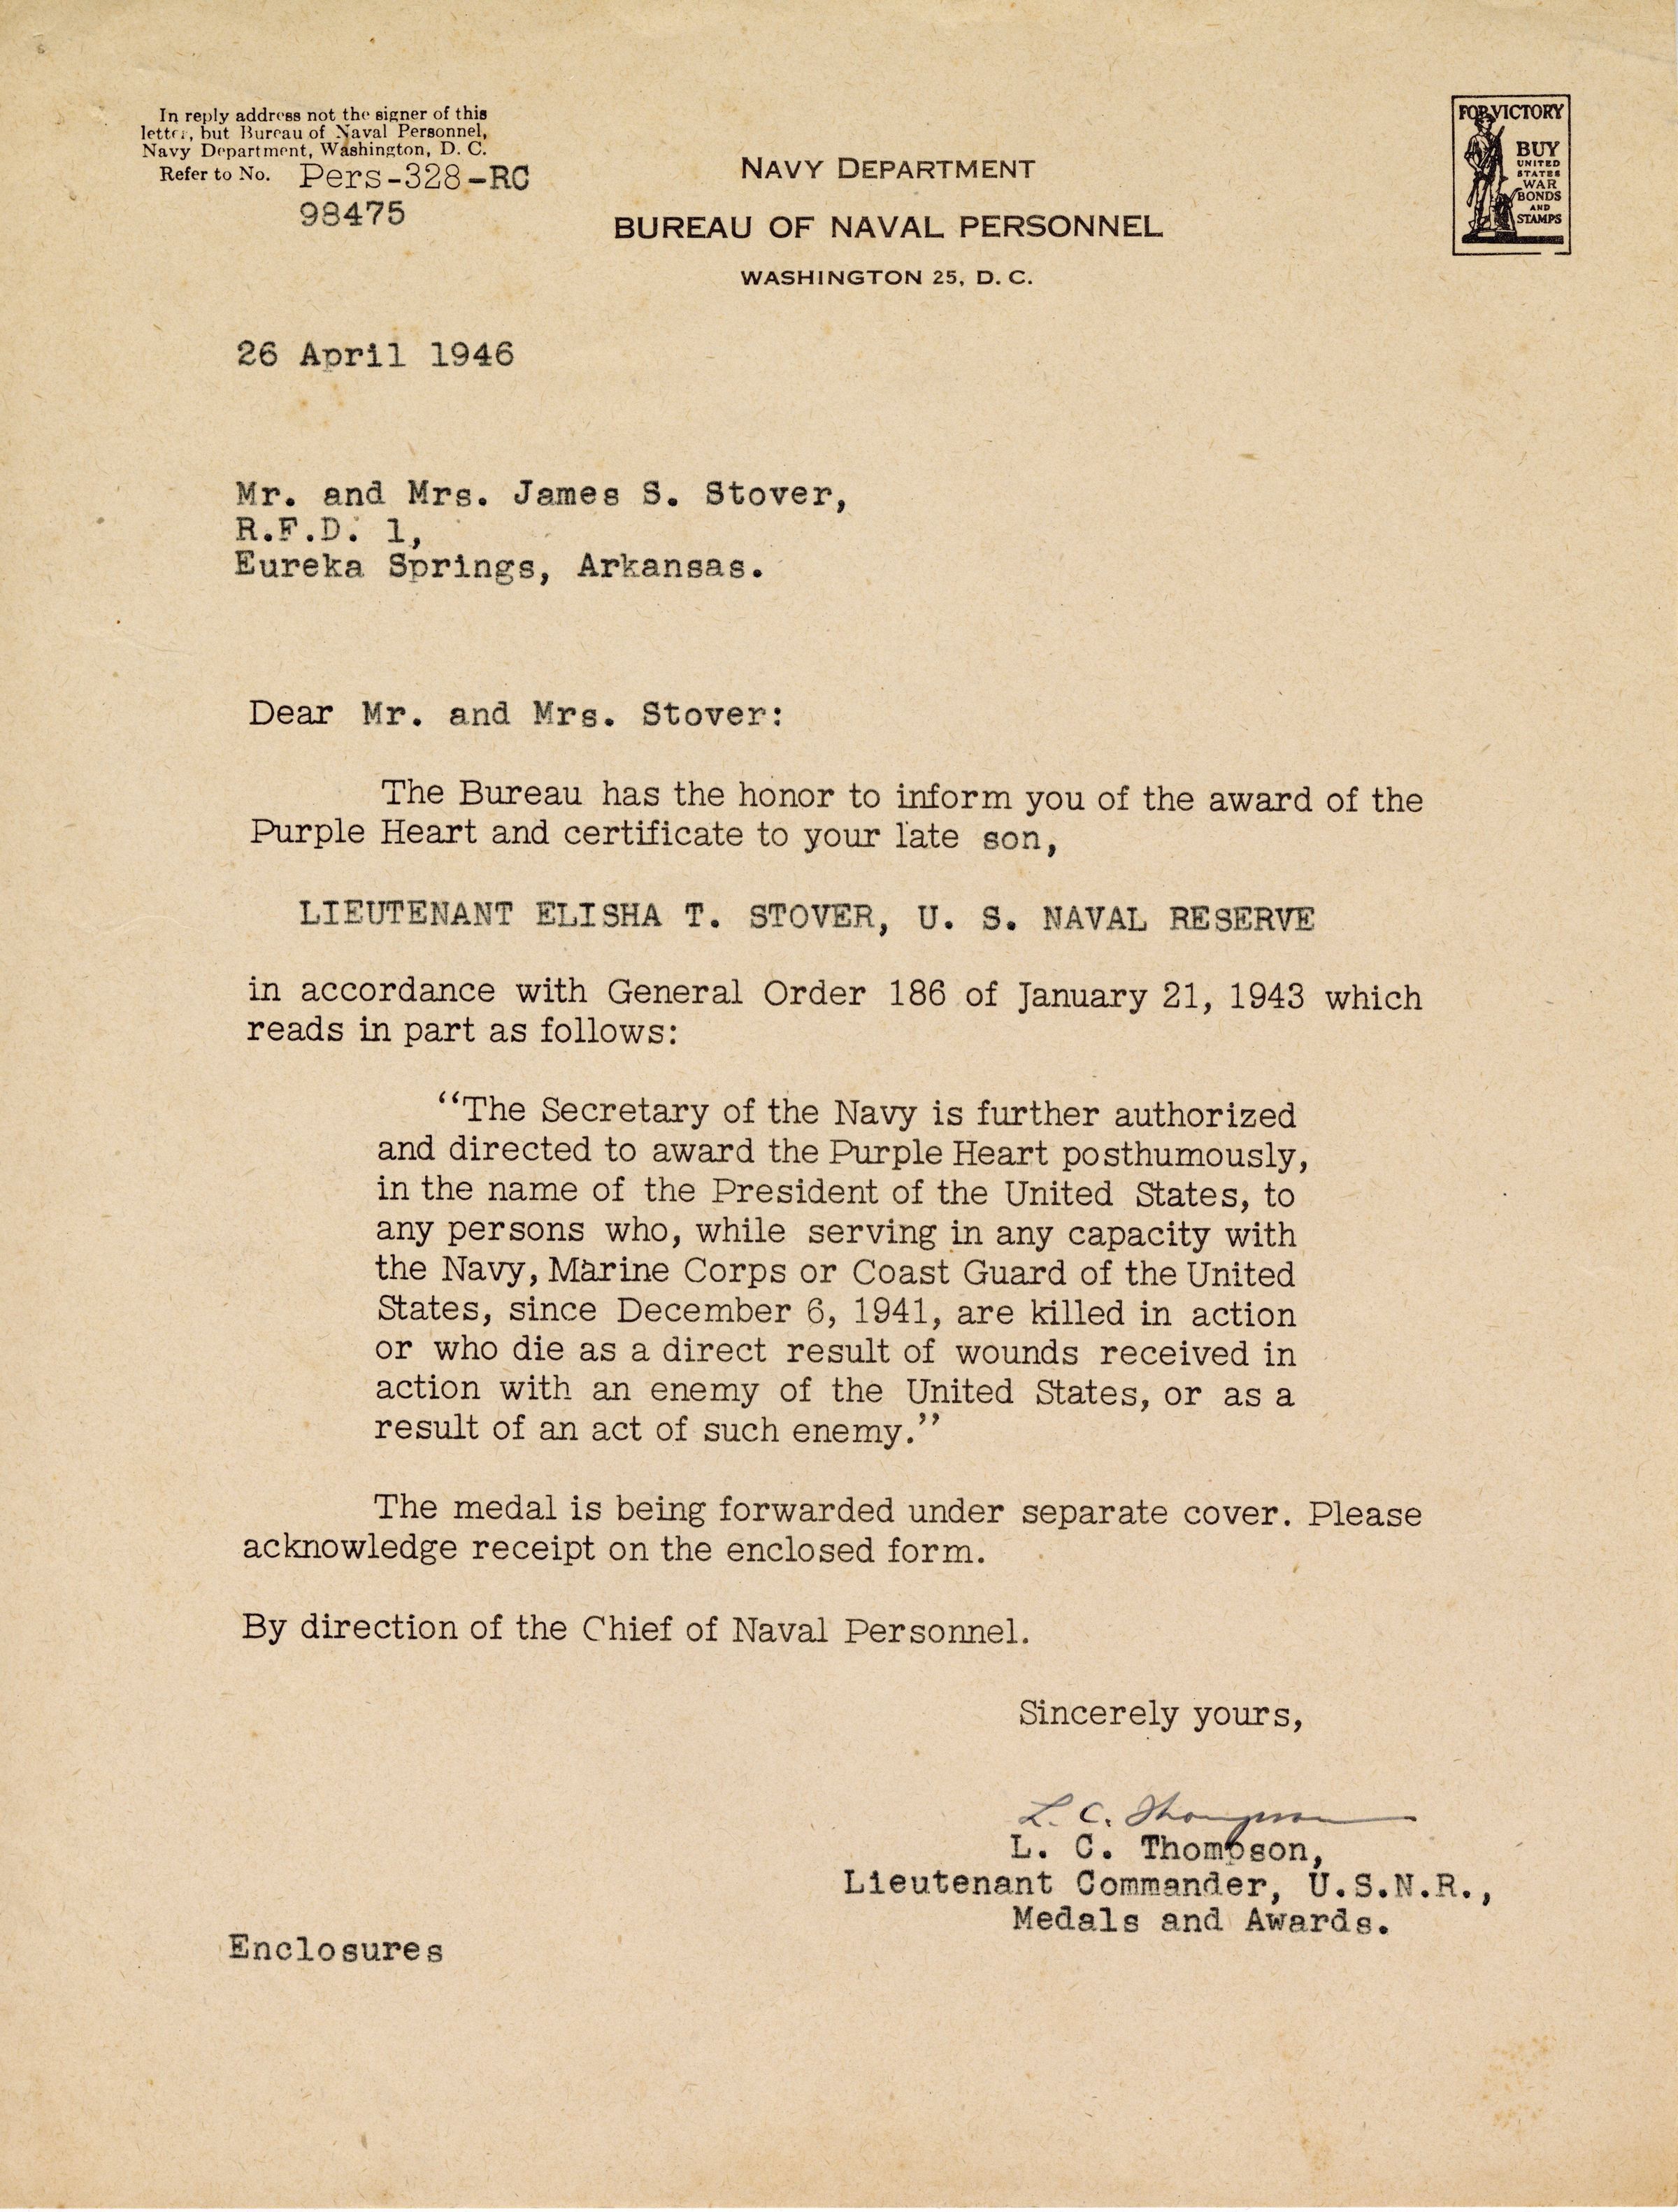 Primary Image of Letter from the Bureau of Naval Personnel Announcing that Elisha 